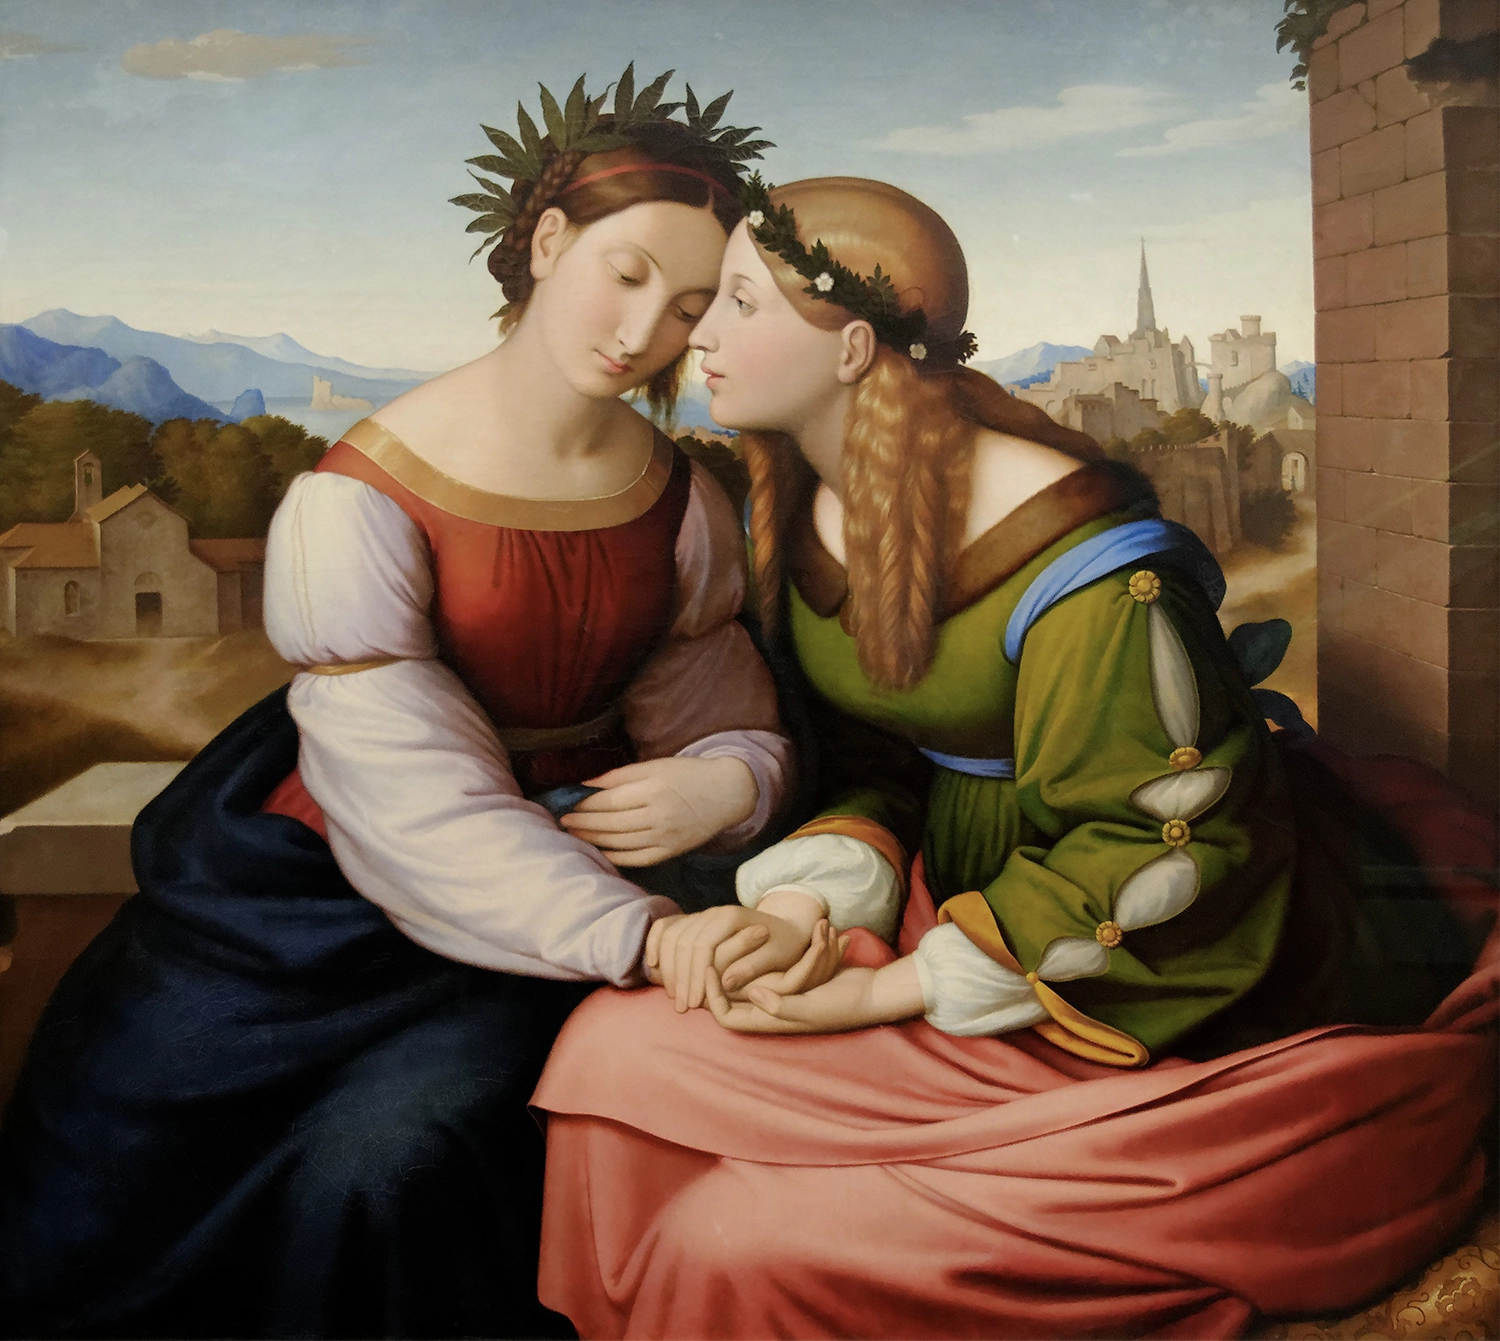 An intimate scene of two women, presumably representing Italy and Germany, who are sitting closely together, holding hands and leaning towards each other.